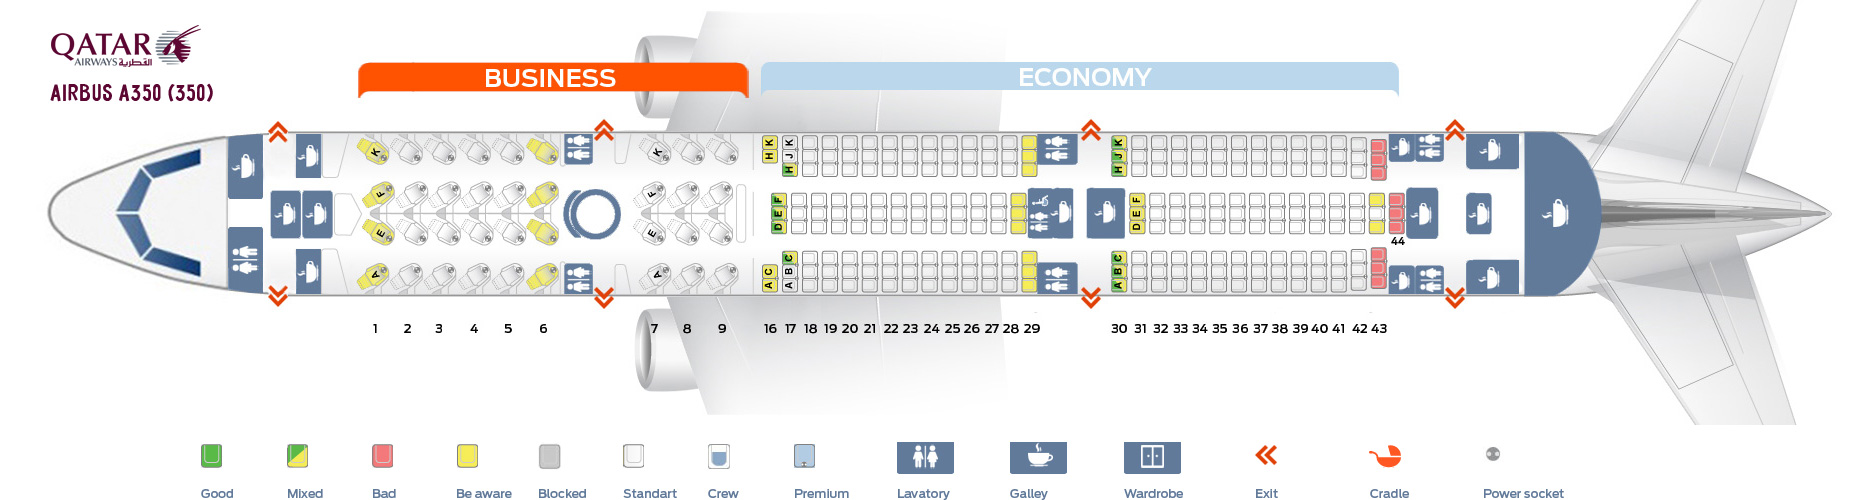 Seat map Airbus A350-900 Qatar Airways. Best seats in the plane